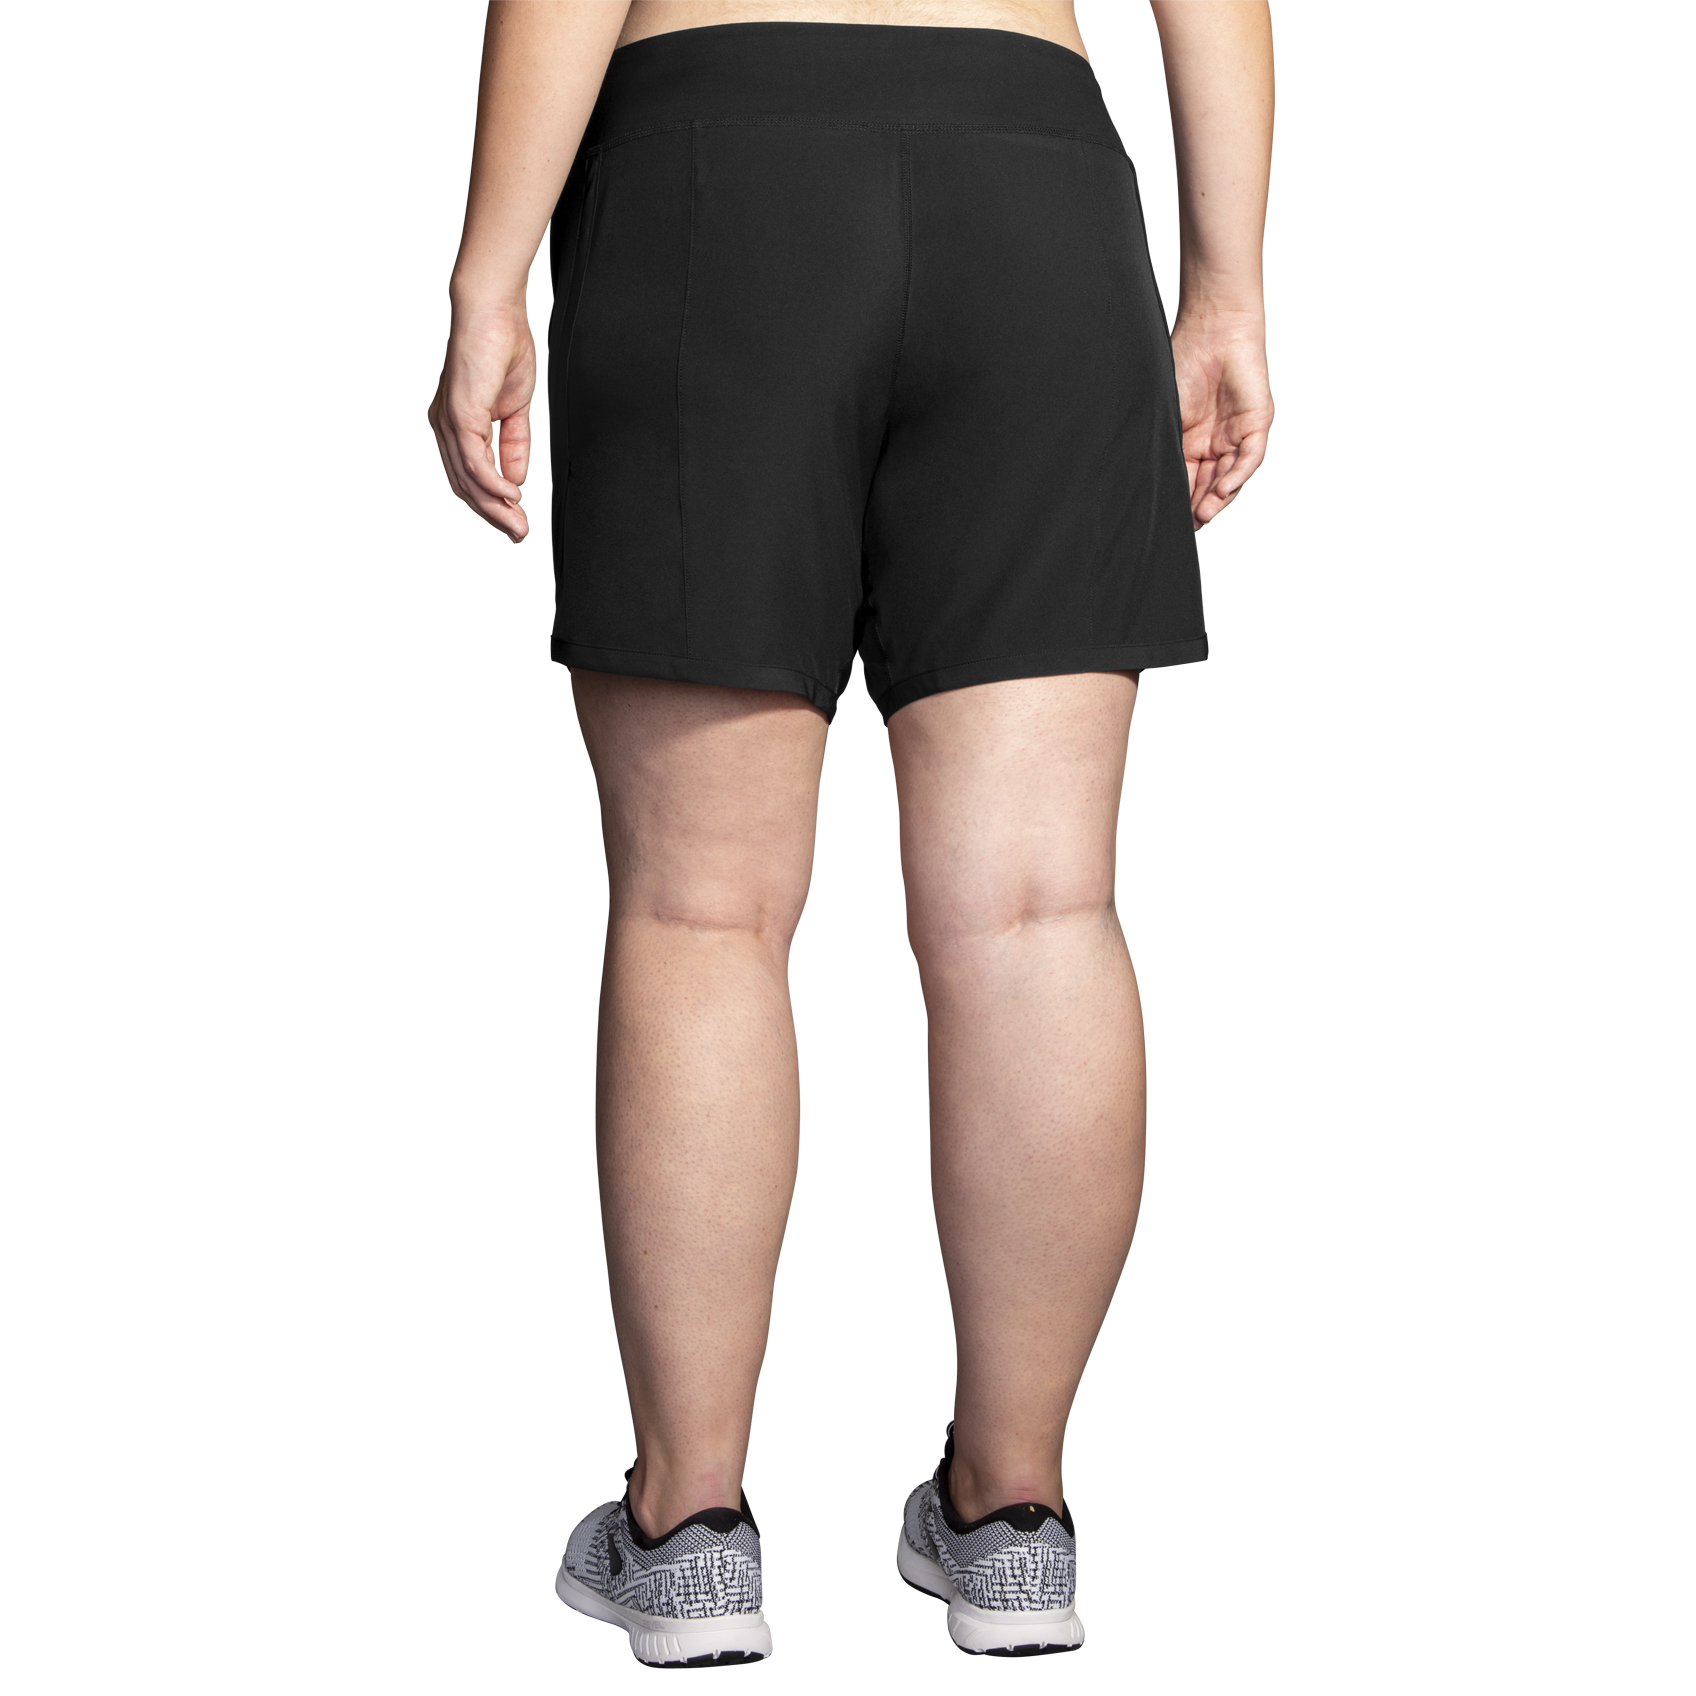 221041-001 black short Brooks Chaser 7 inches women’s running trousers